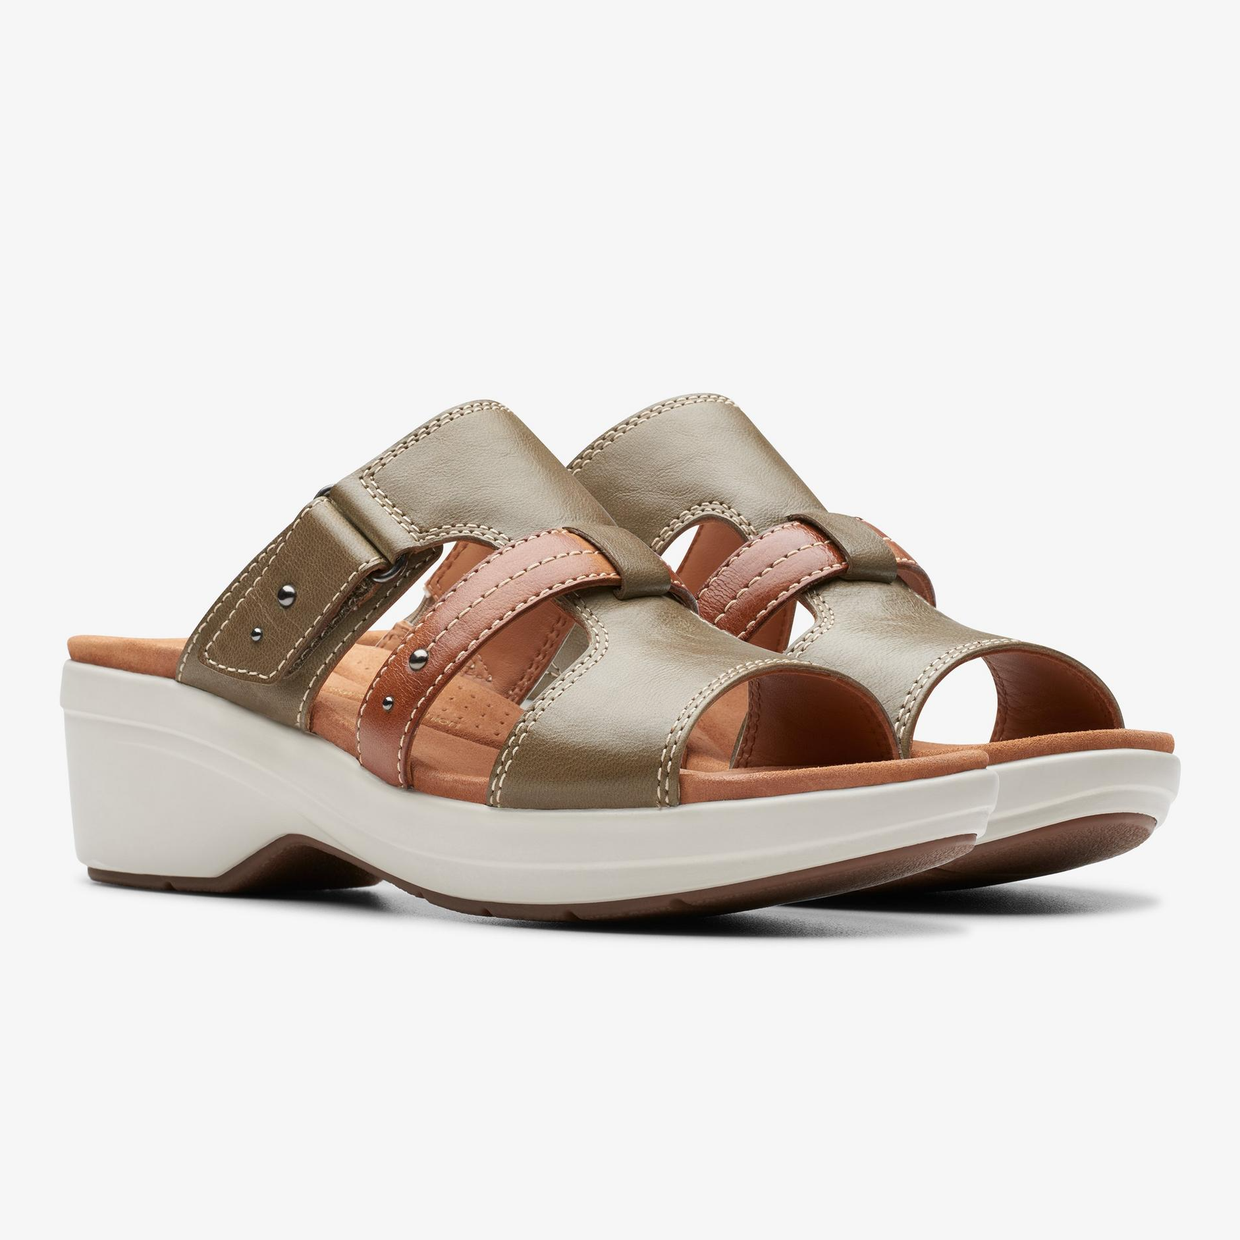 A pair of women's open-toed sandals with a chunky, two-tone sole and metallic and neutral straps.